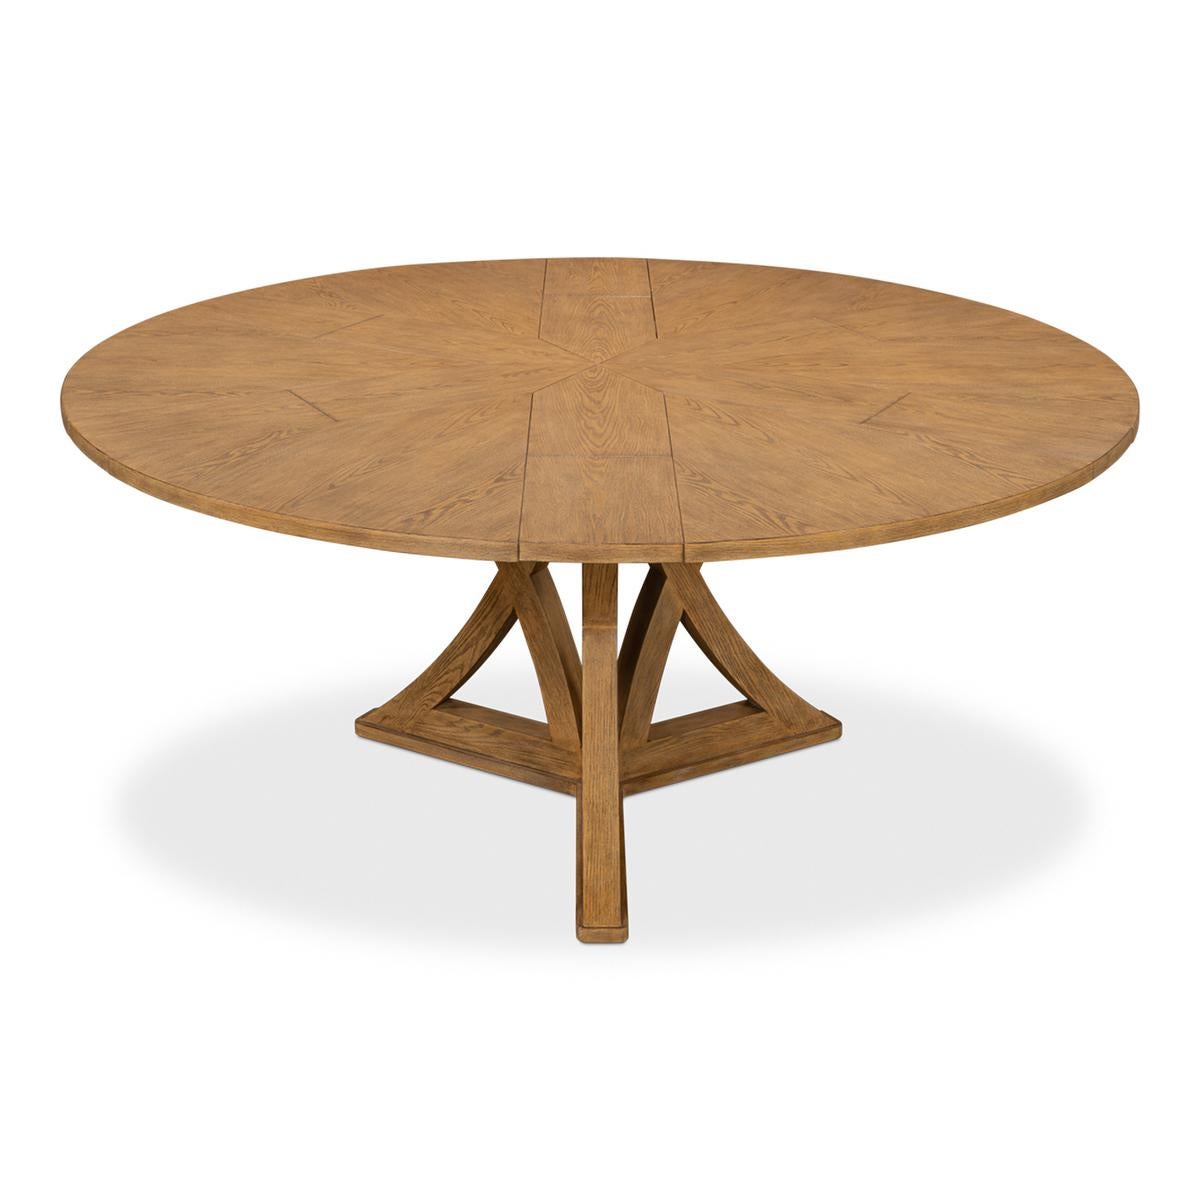 Rustic Round Dining Table - Heather Grey In New Condition For Sale In Westwood, NJ